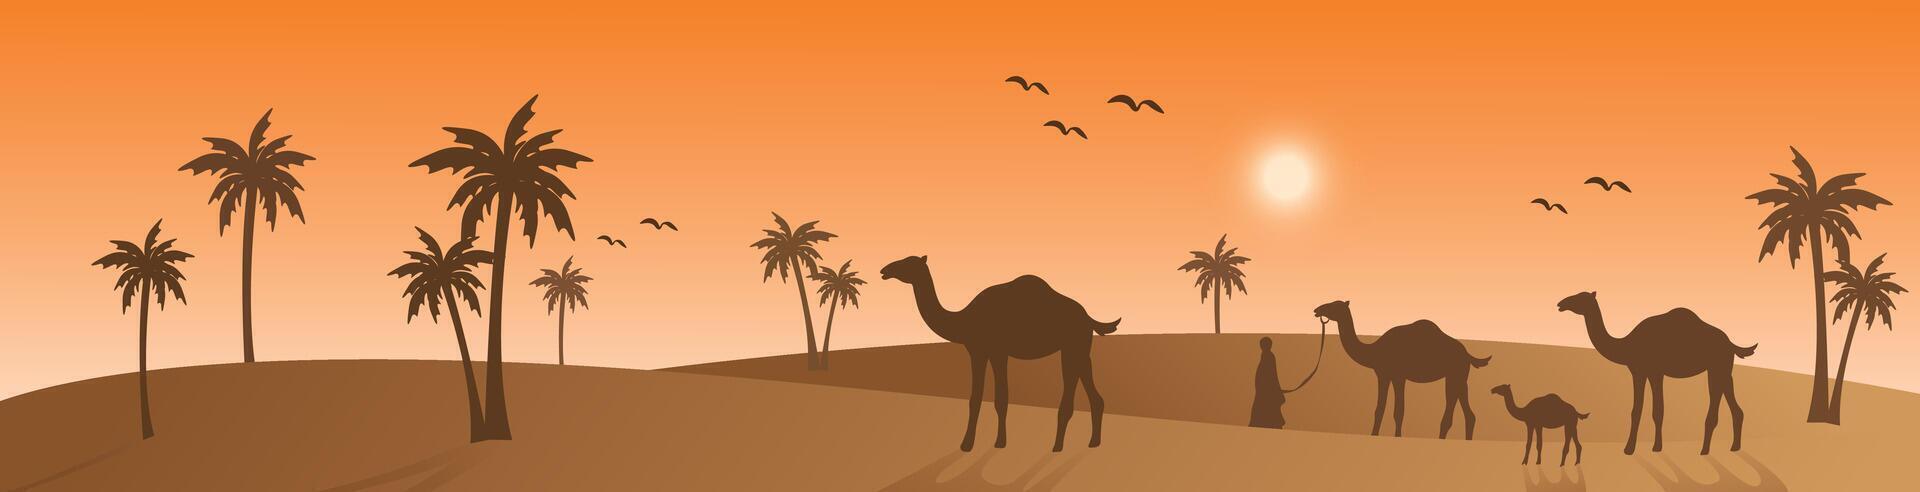 arabic web horizontal banner, camel and palm tree silhouette, desert view with beautiful sunlight, sunset, sunrise, islamic background template vector